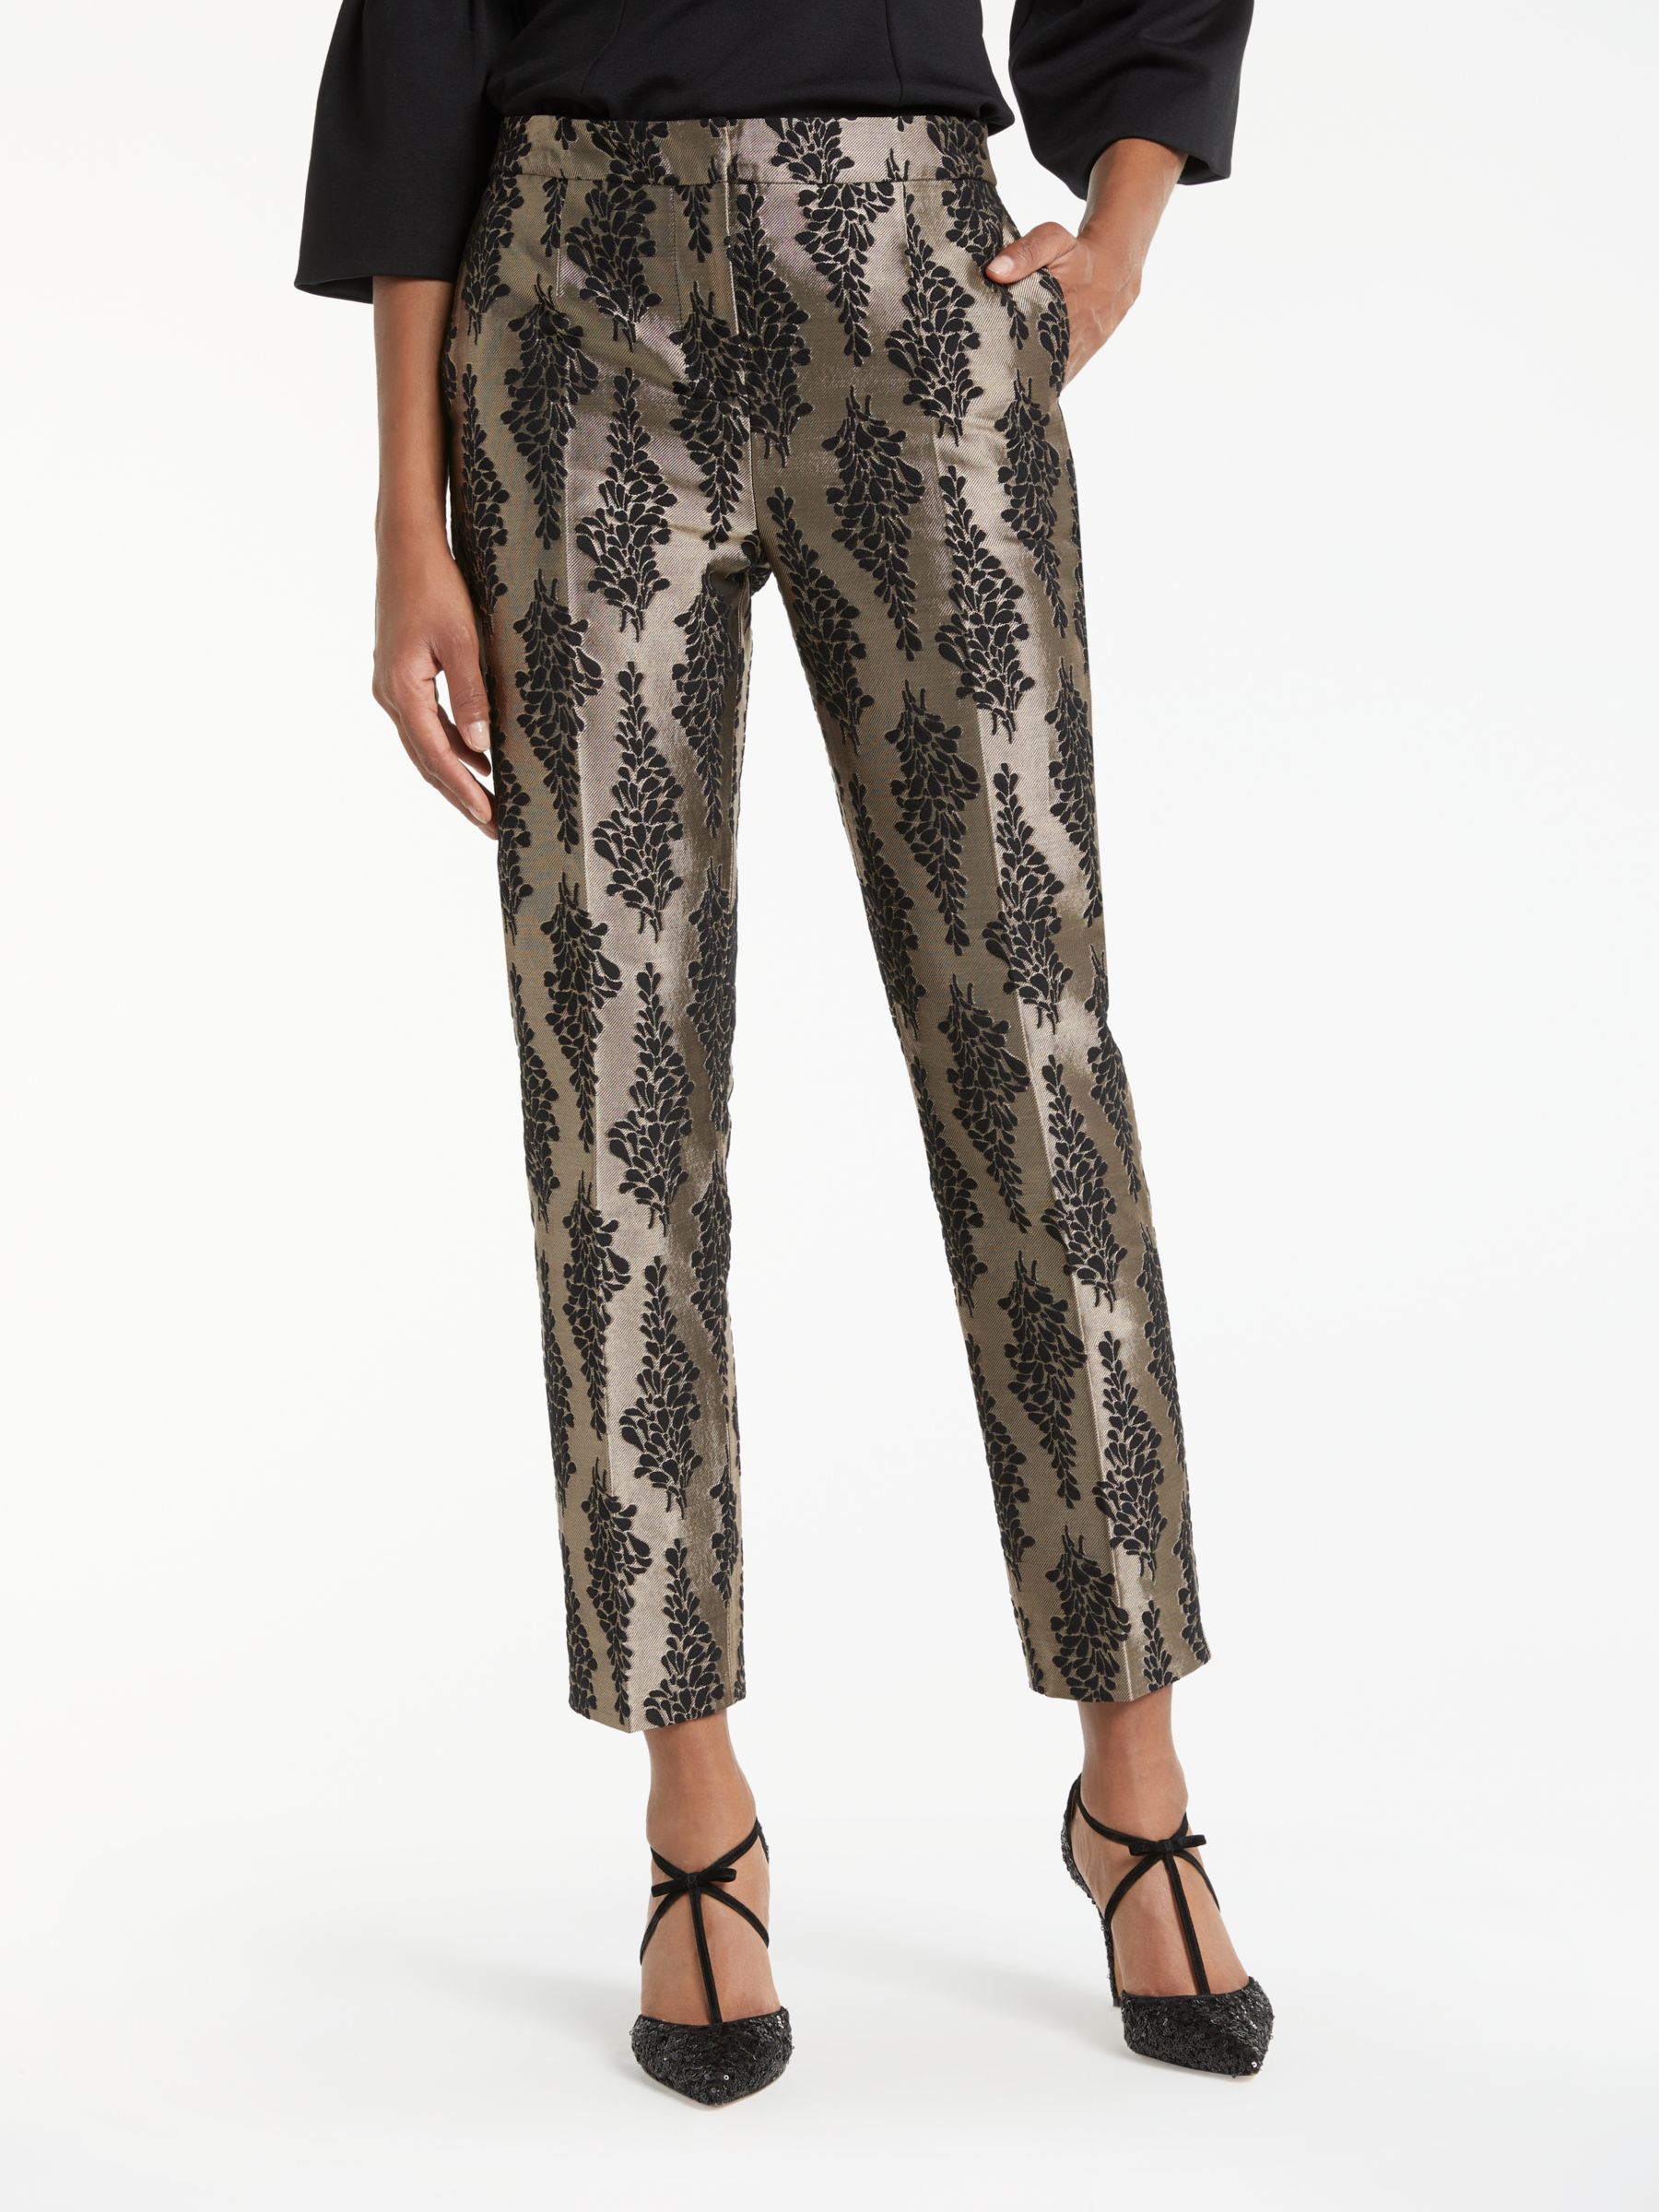 Boden Jacquard Party Trousers, Black/Pewter